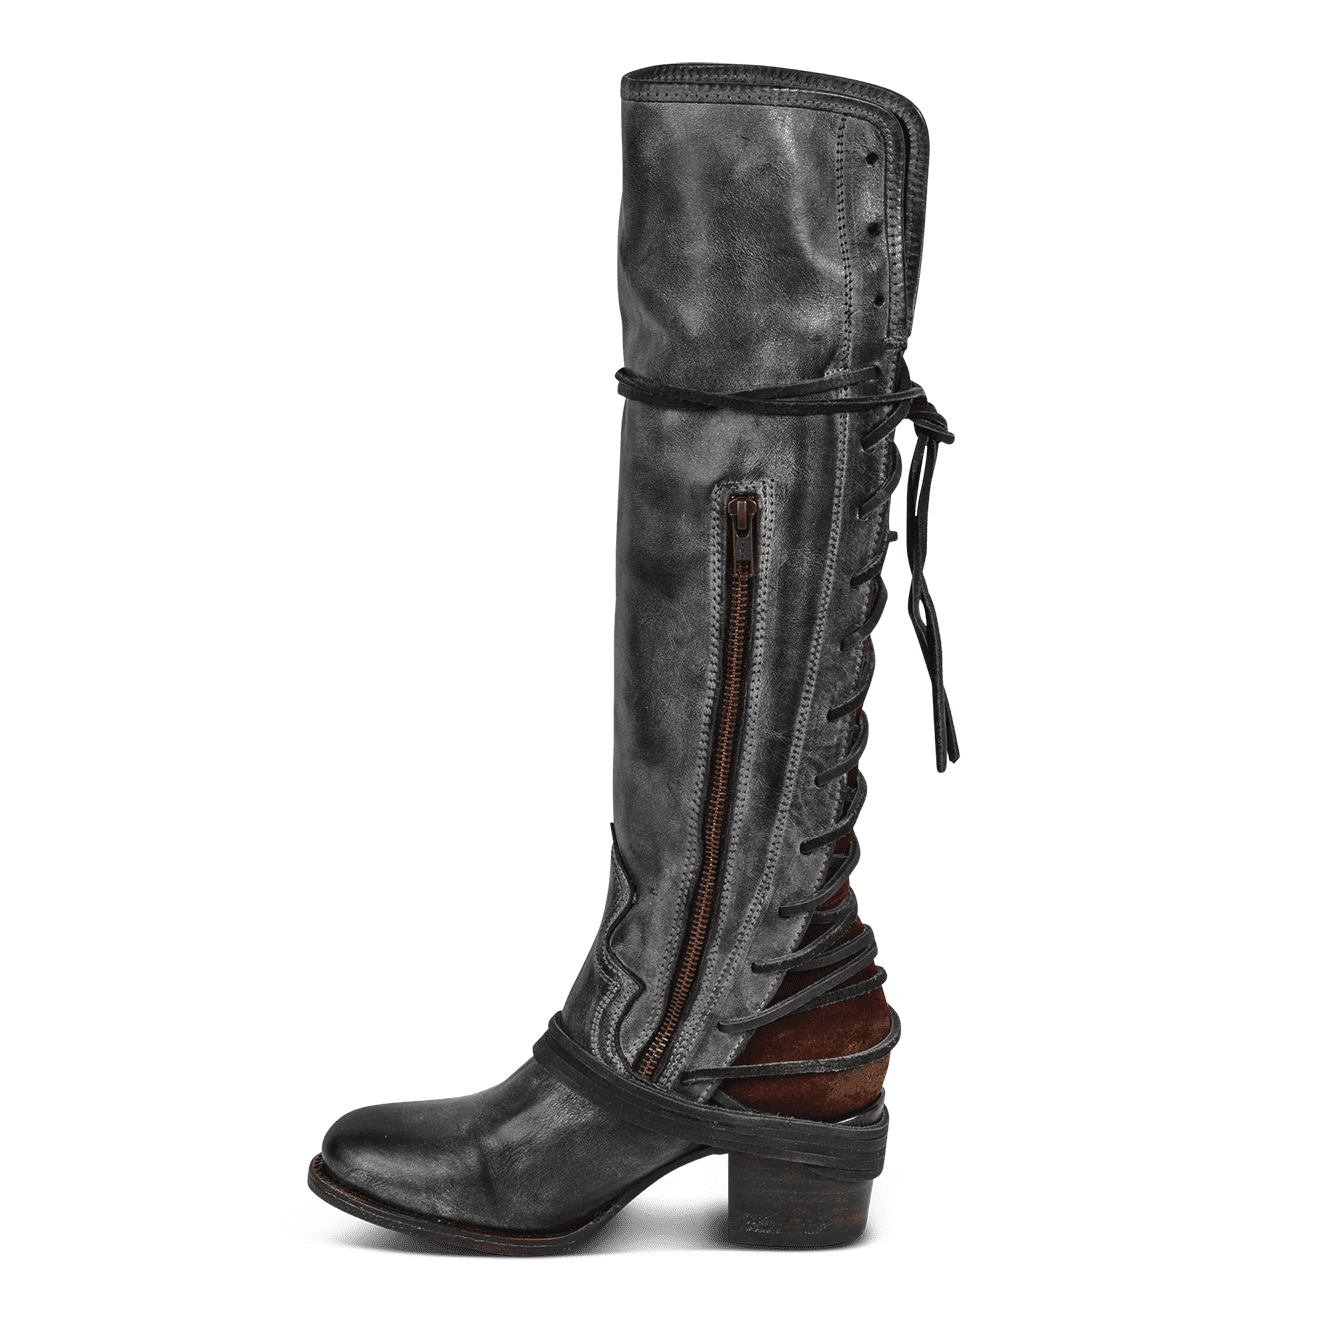 Inside view showing working brass zip closure and adjustable wrap around laces on FREEBIRD women's Coal black  tall boot